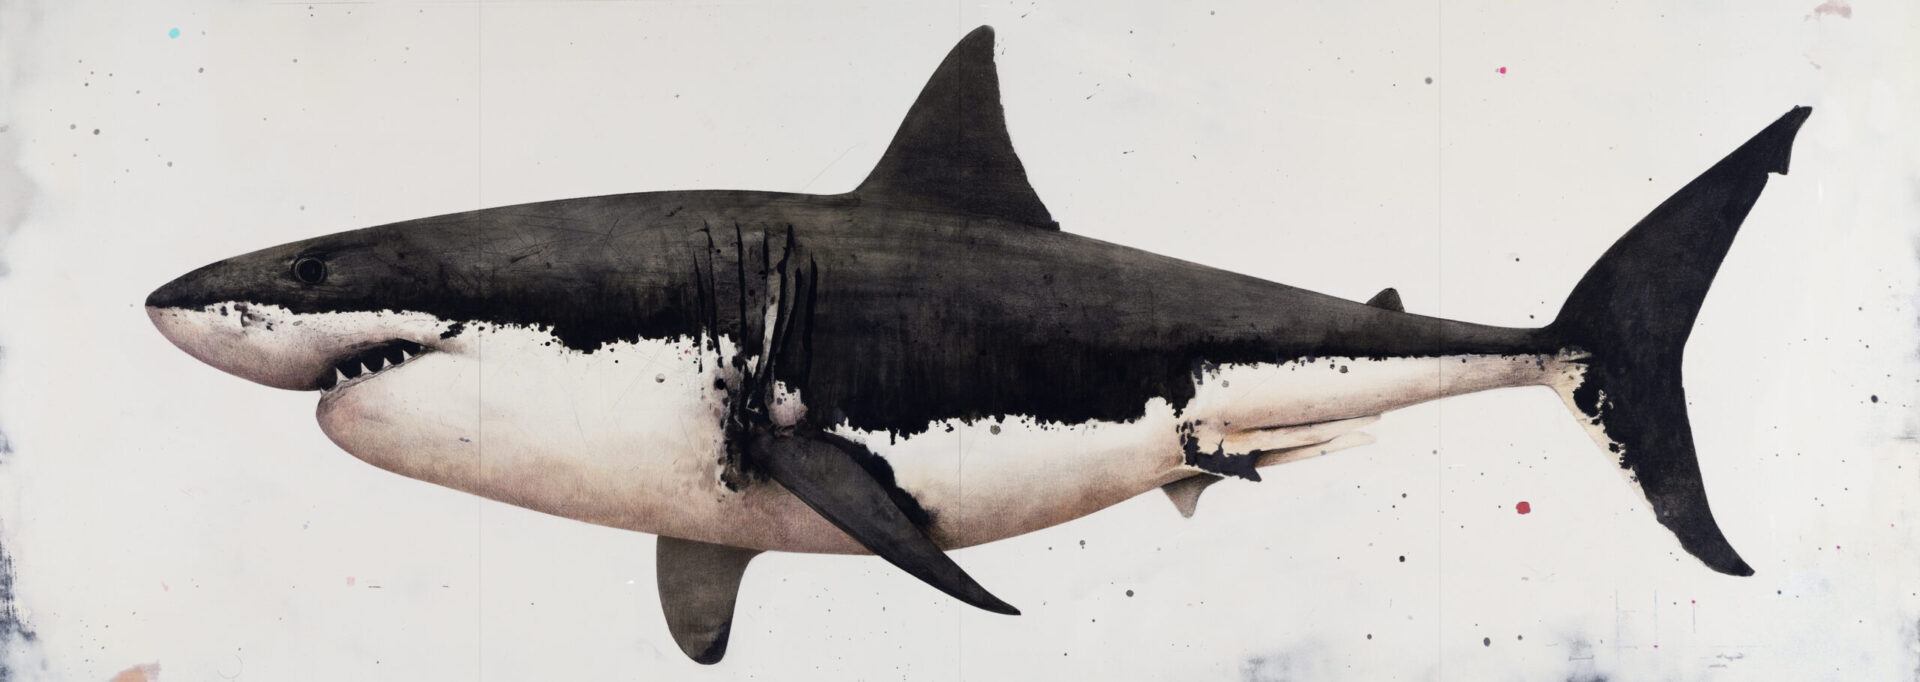 DM White Shark 2020 121x292 cm Etching ed. 255PA Print with Chine Colle on Zerkall Butten paper scaled Pigment Gallery Galería de Arte en Barcelona David Morago